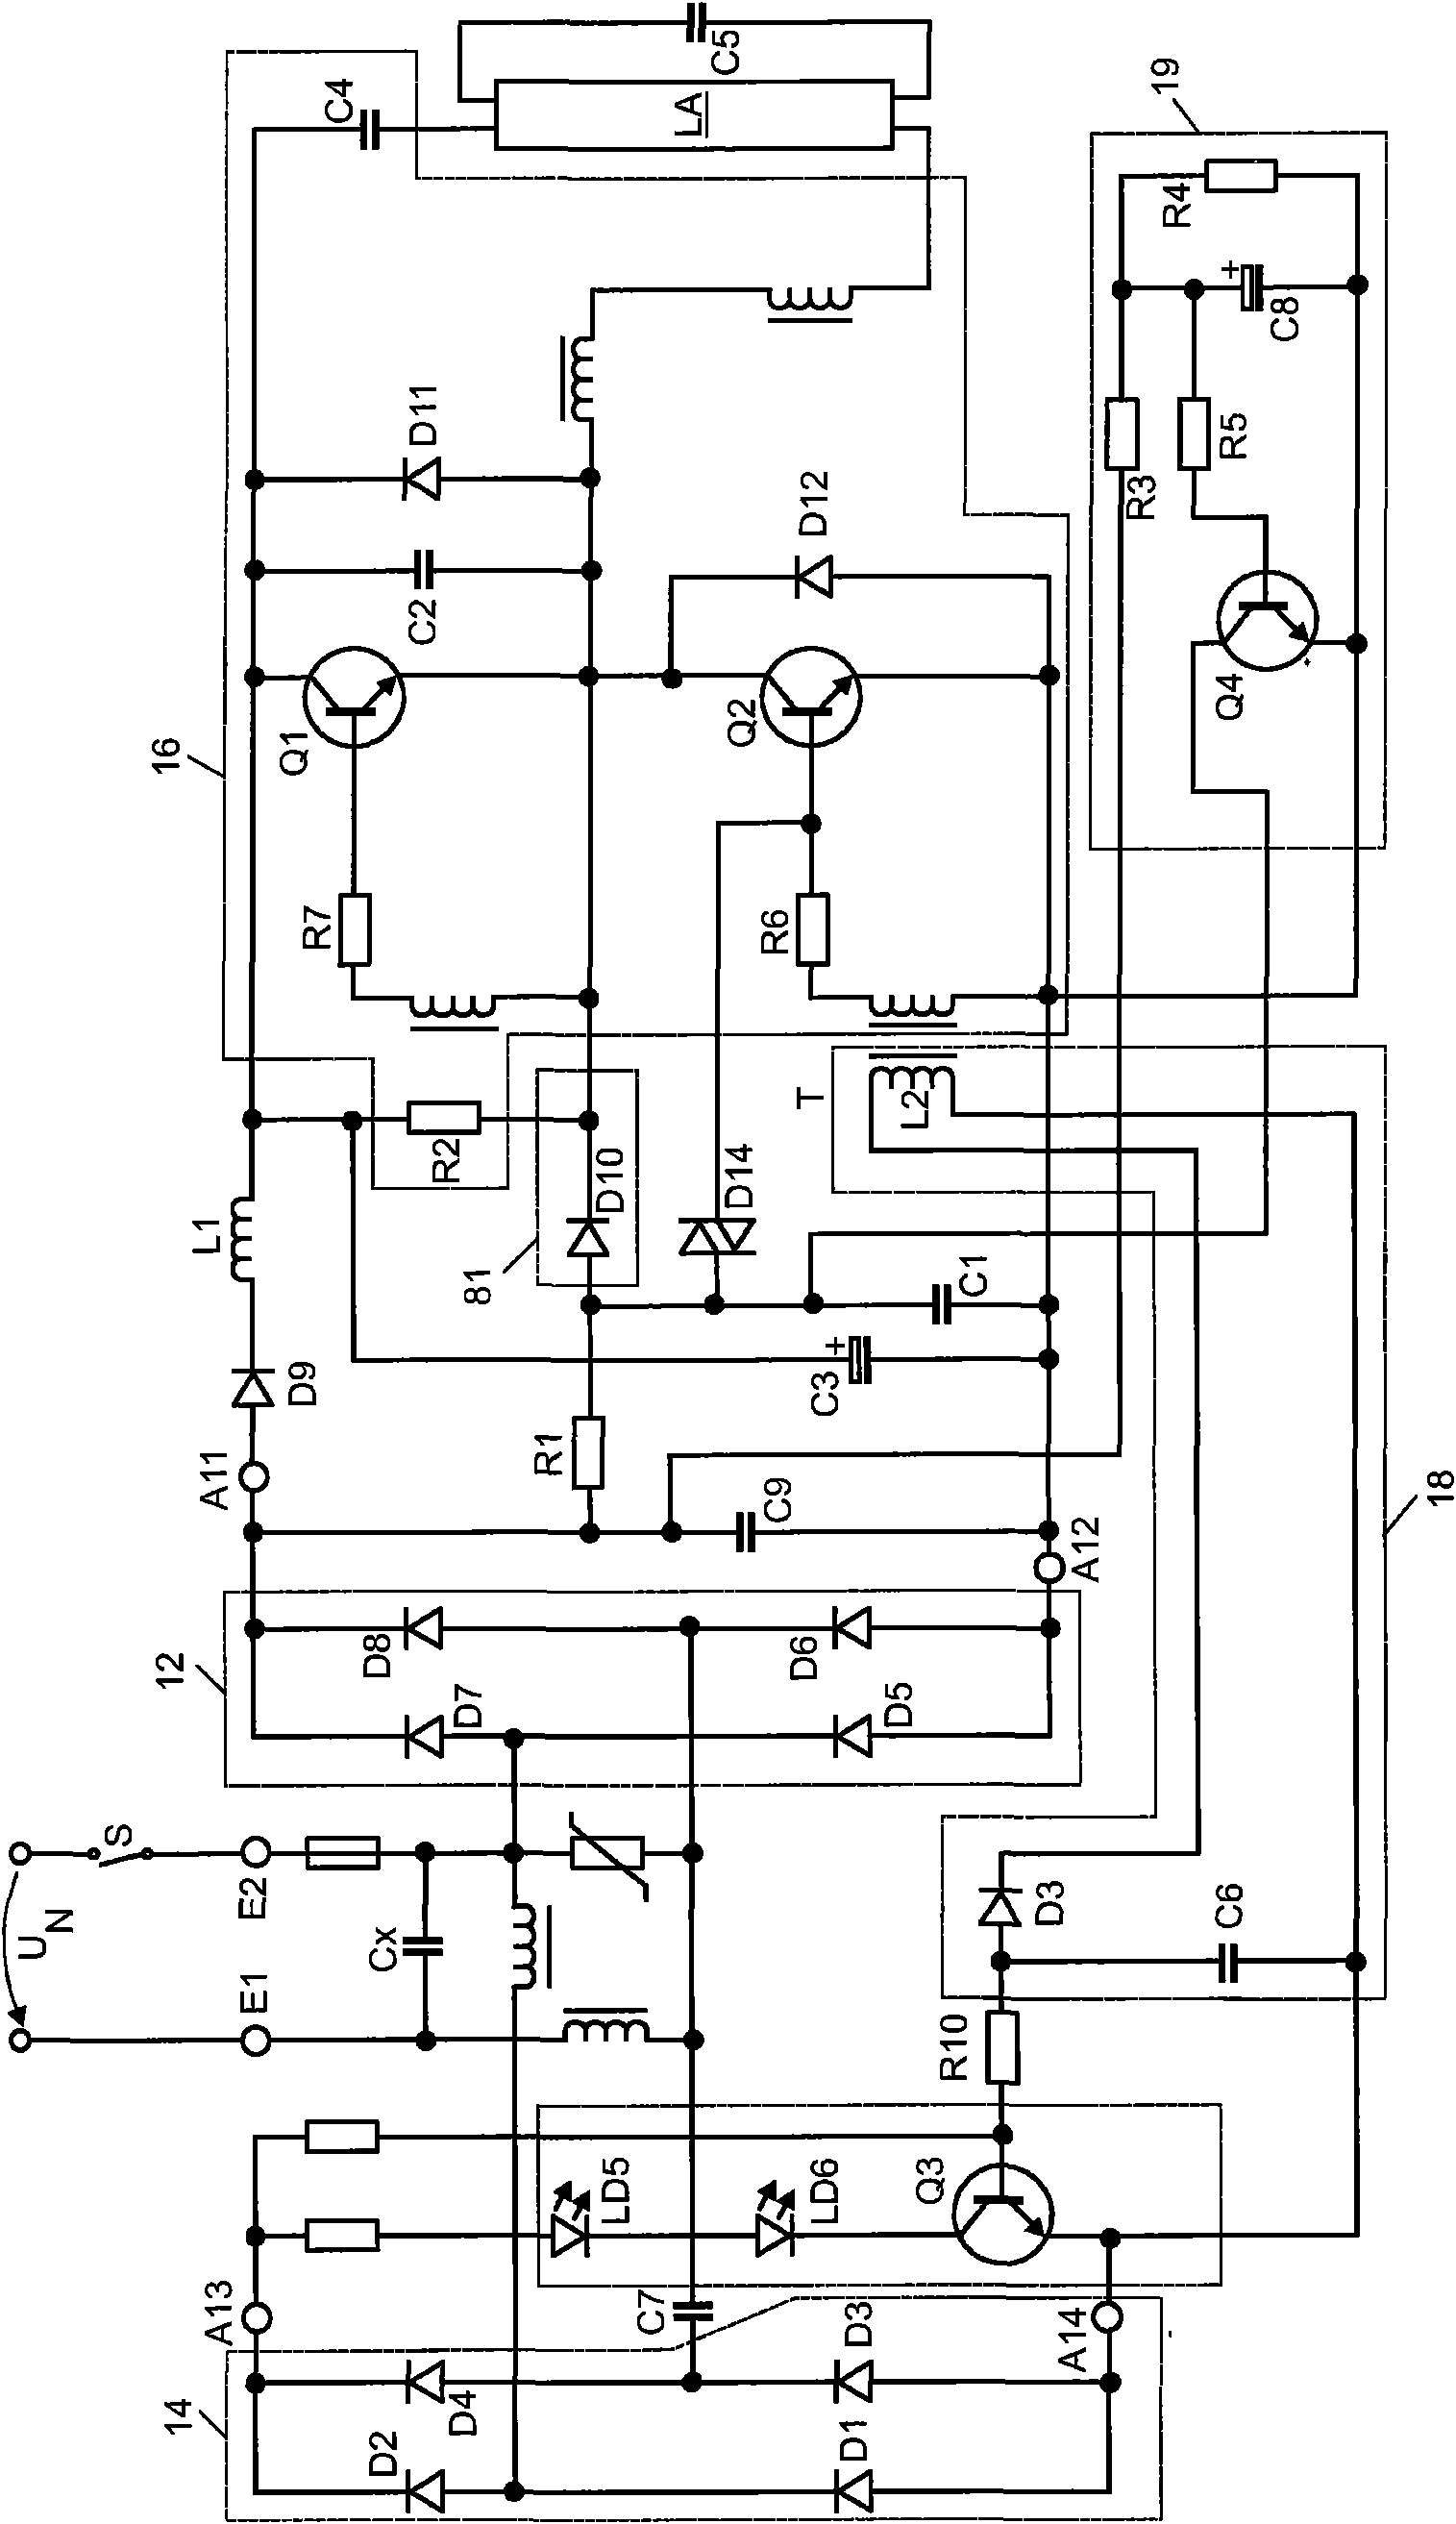 Circuit arrangement and method for operating at least one led and at least one fluorescent lamp